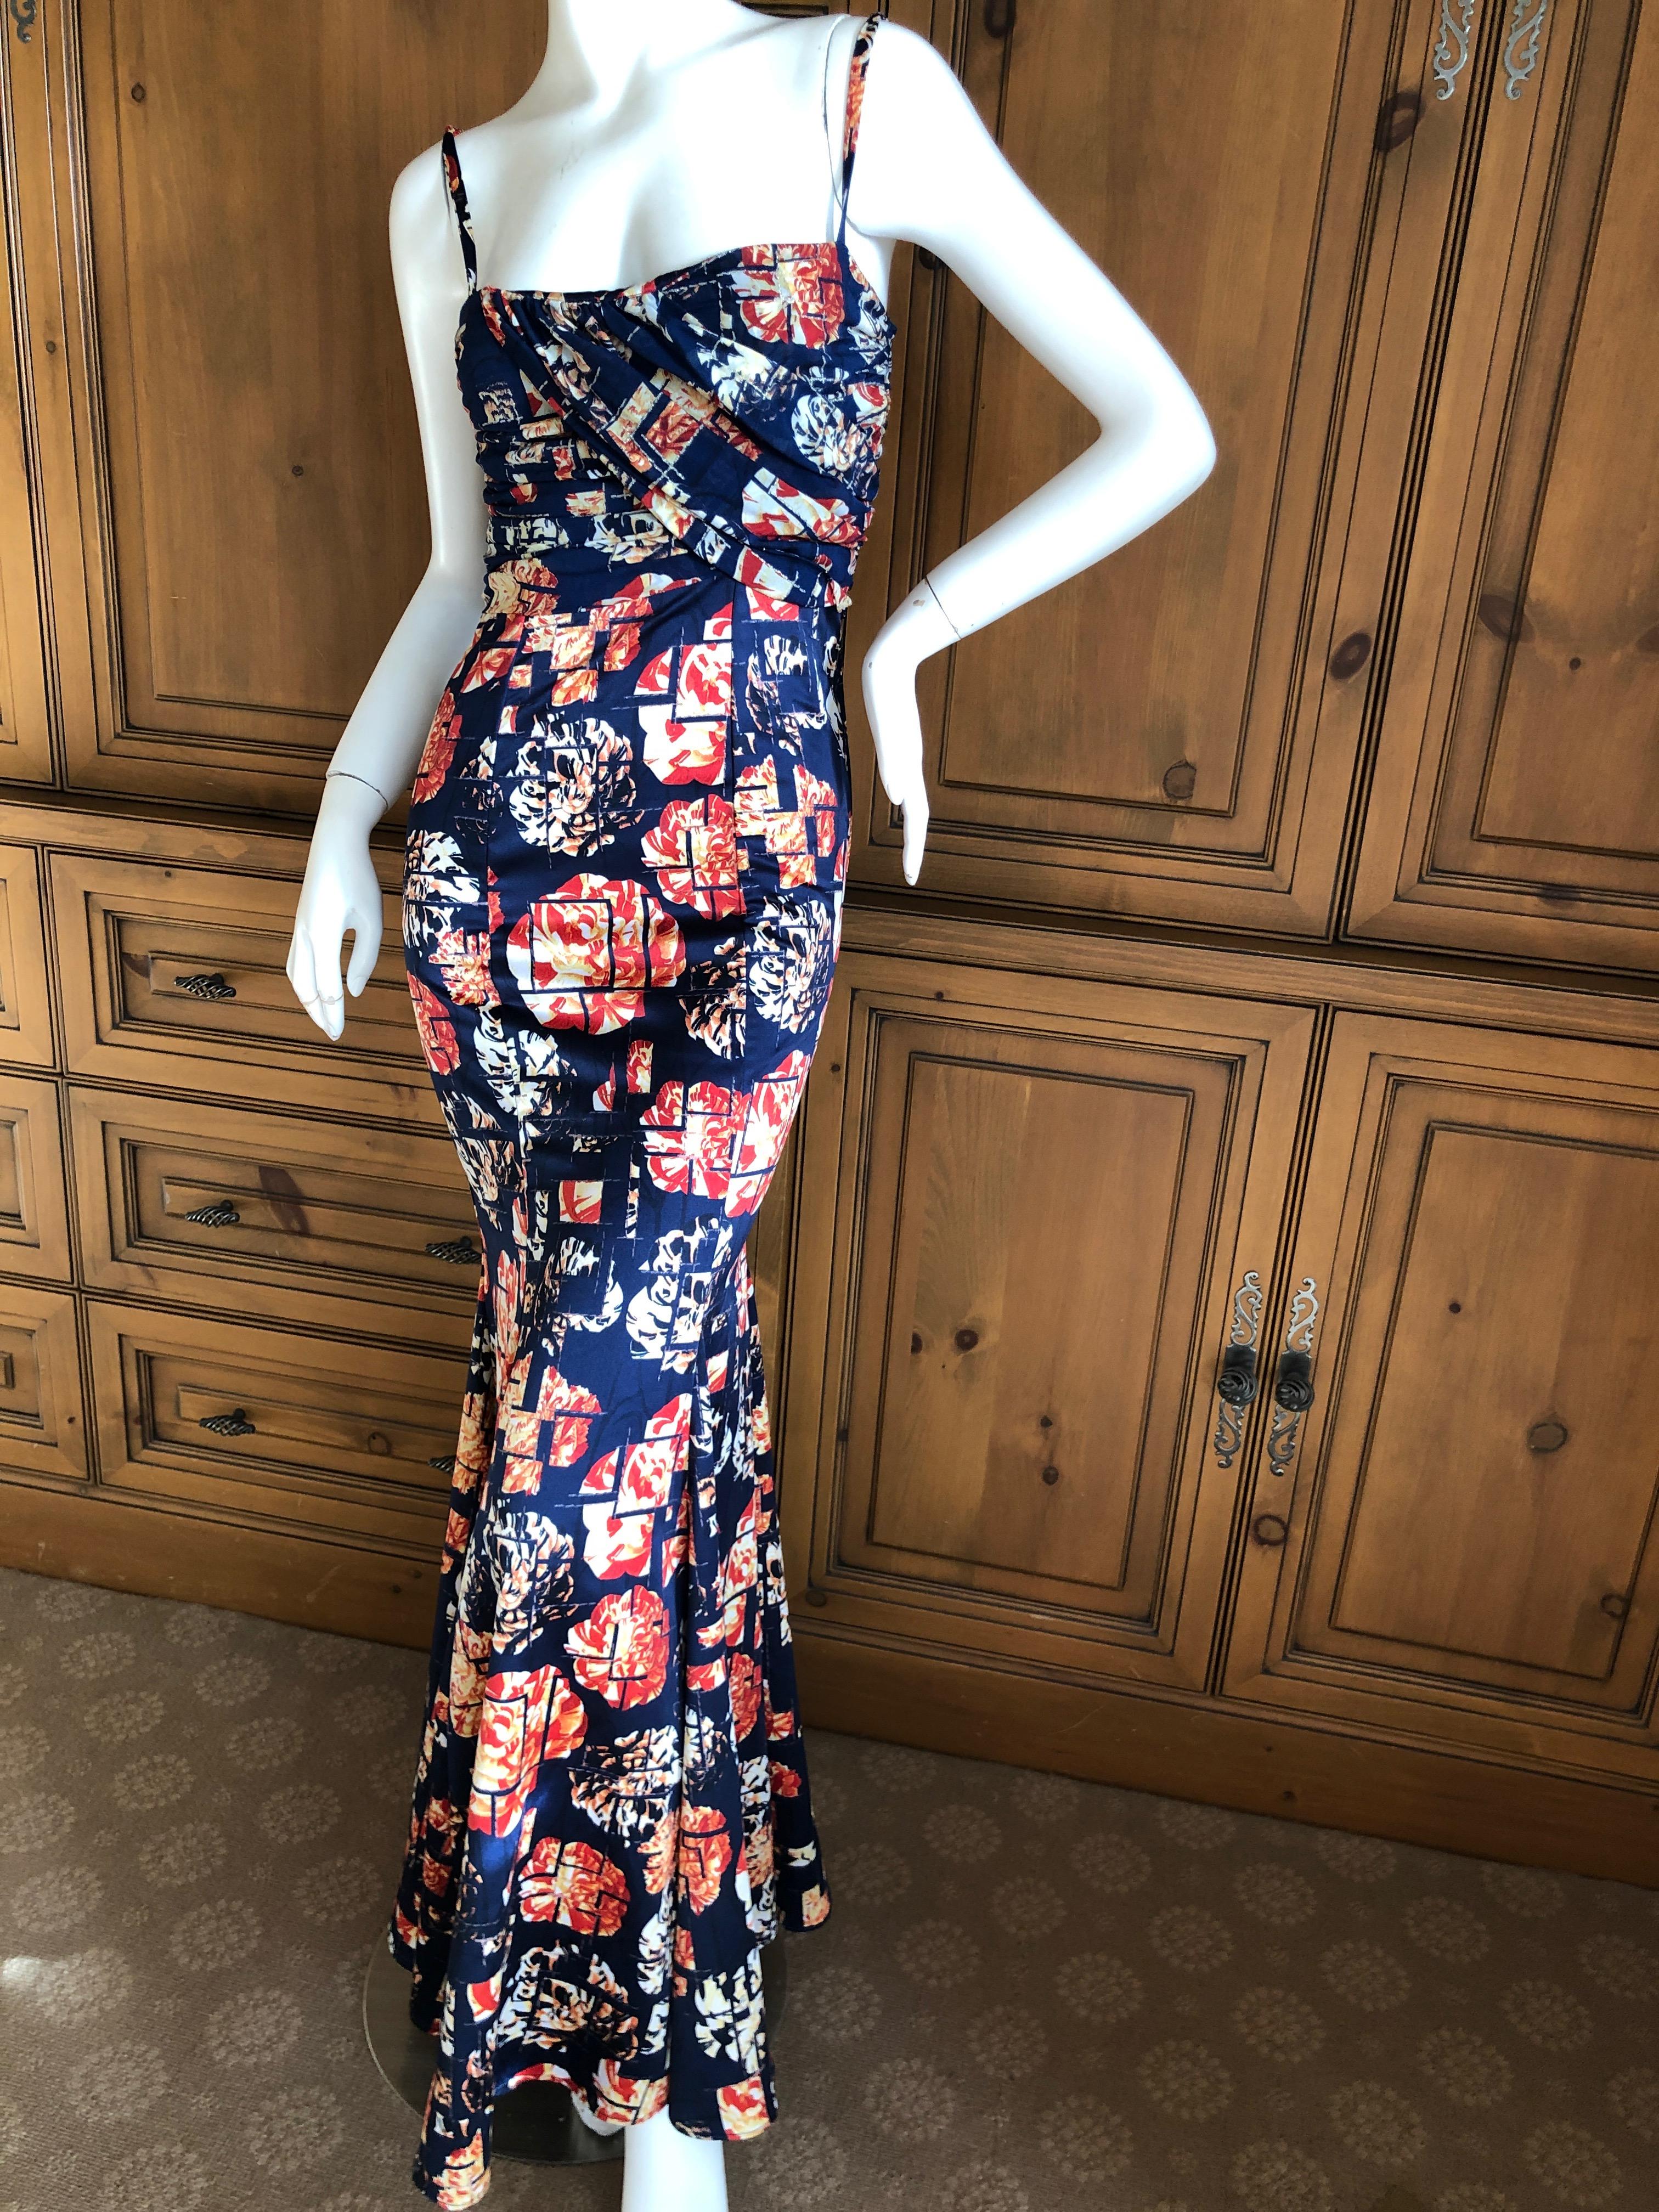 Roberto Cavalli for Just Cavalli  Vintage Floral Evening Dress In Excellent Condition For Sale In Cloverdale, CA